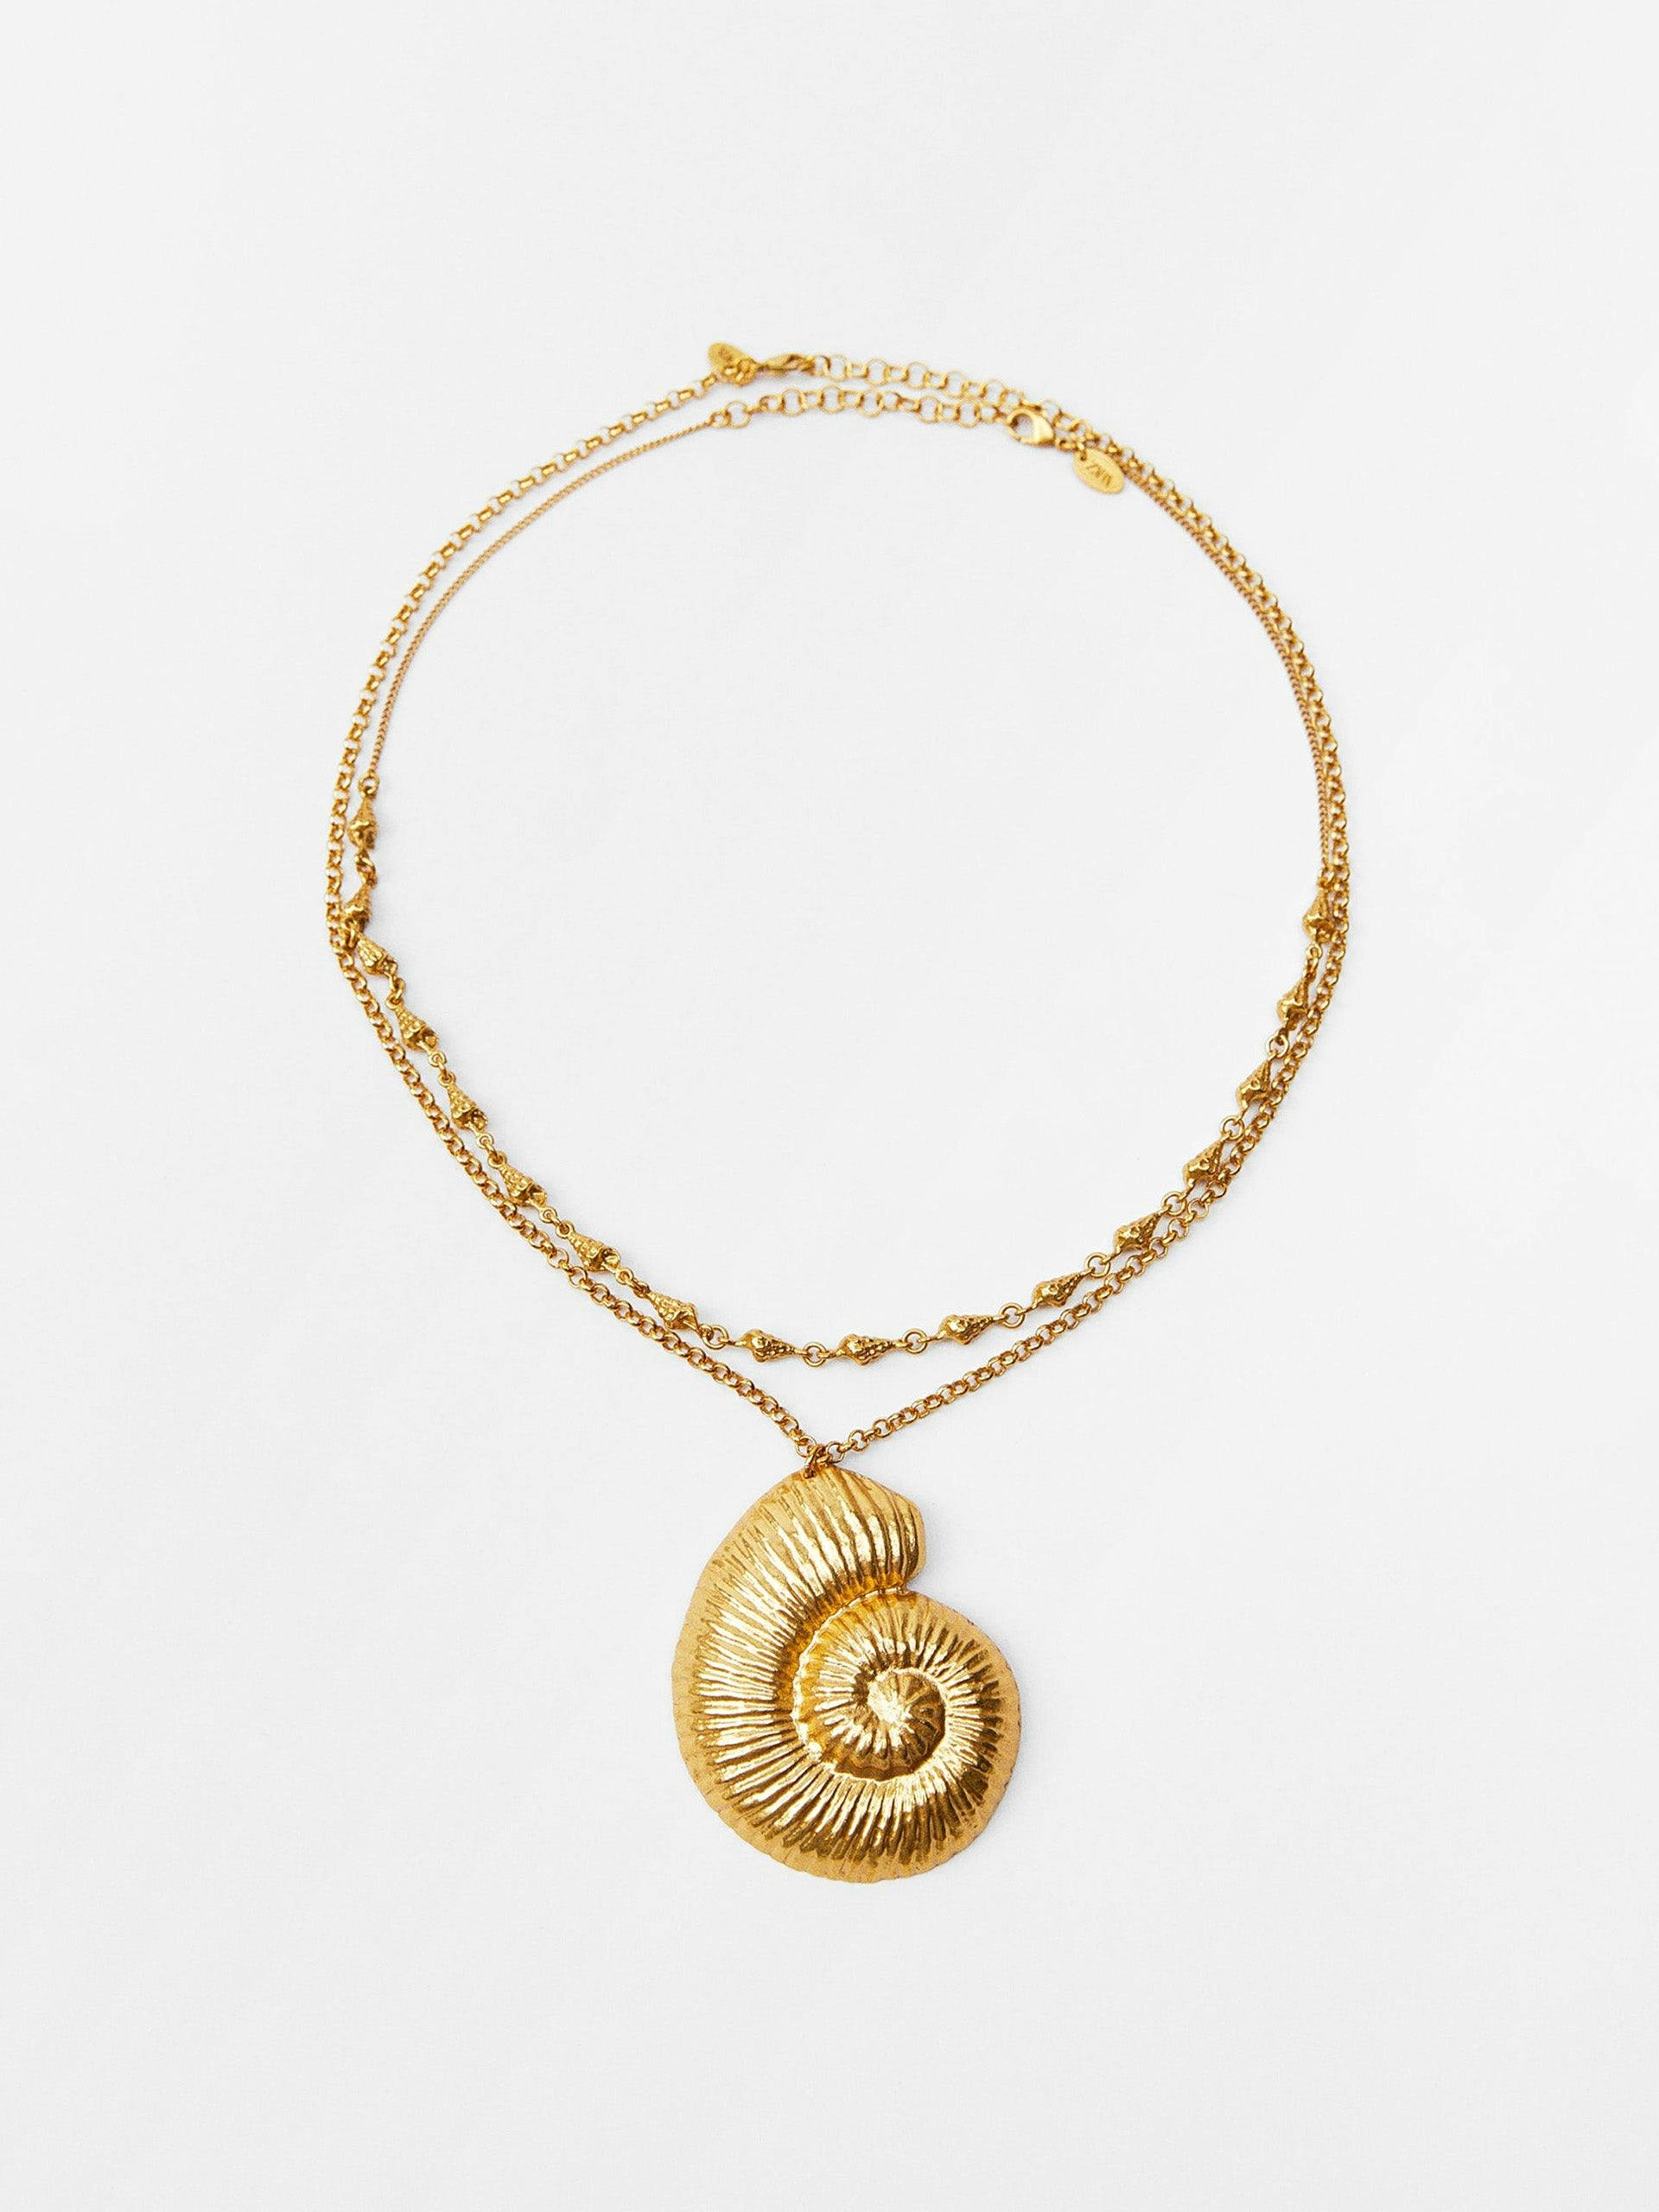 Seashell chain necklace